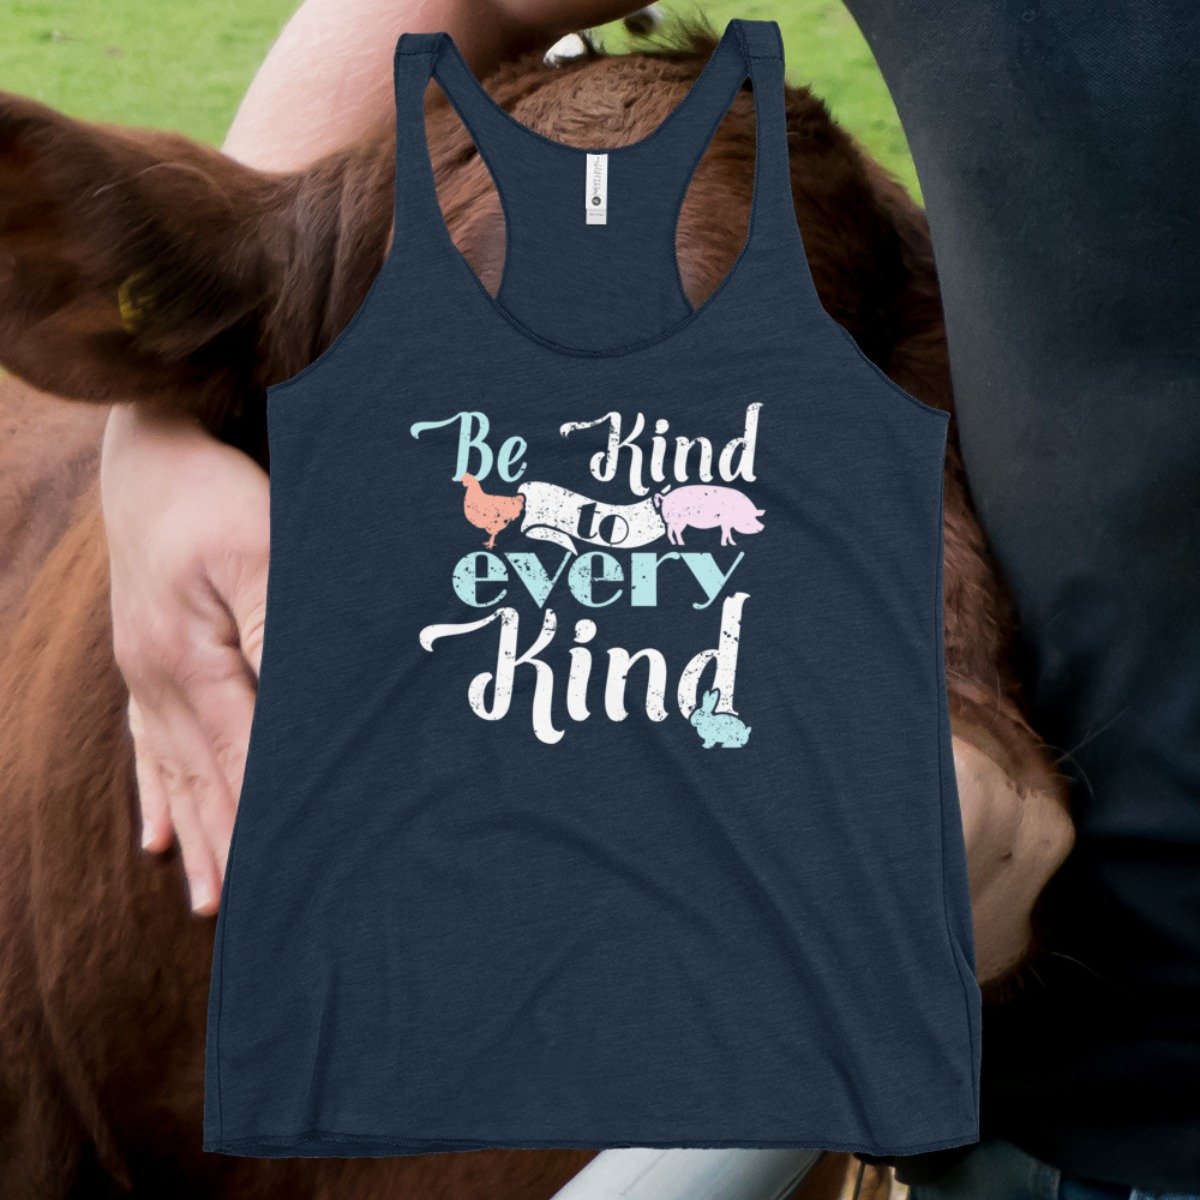 Vegan tank top that reads be kind to every kind.jpg